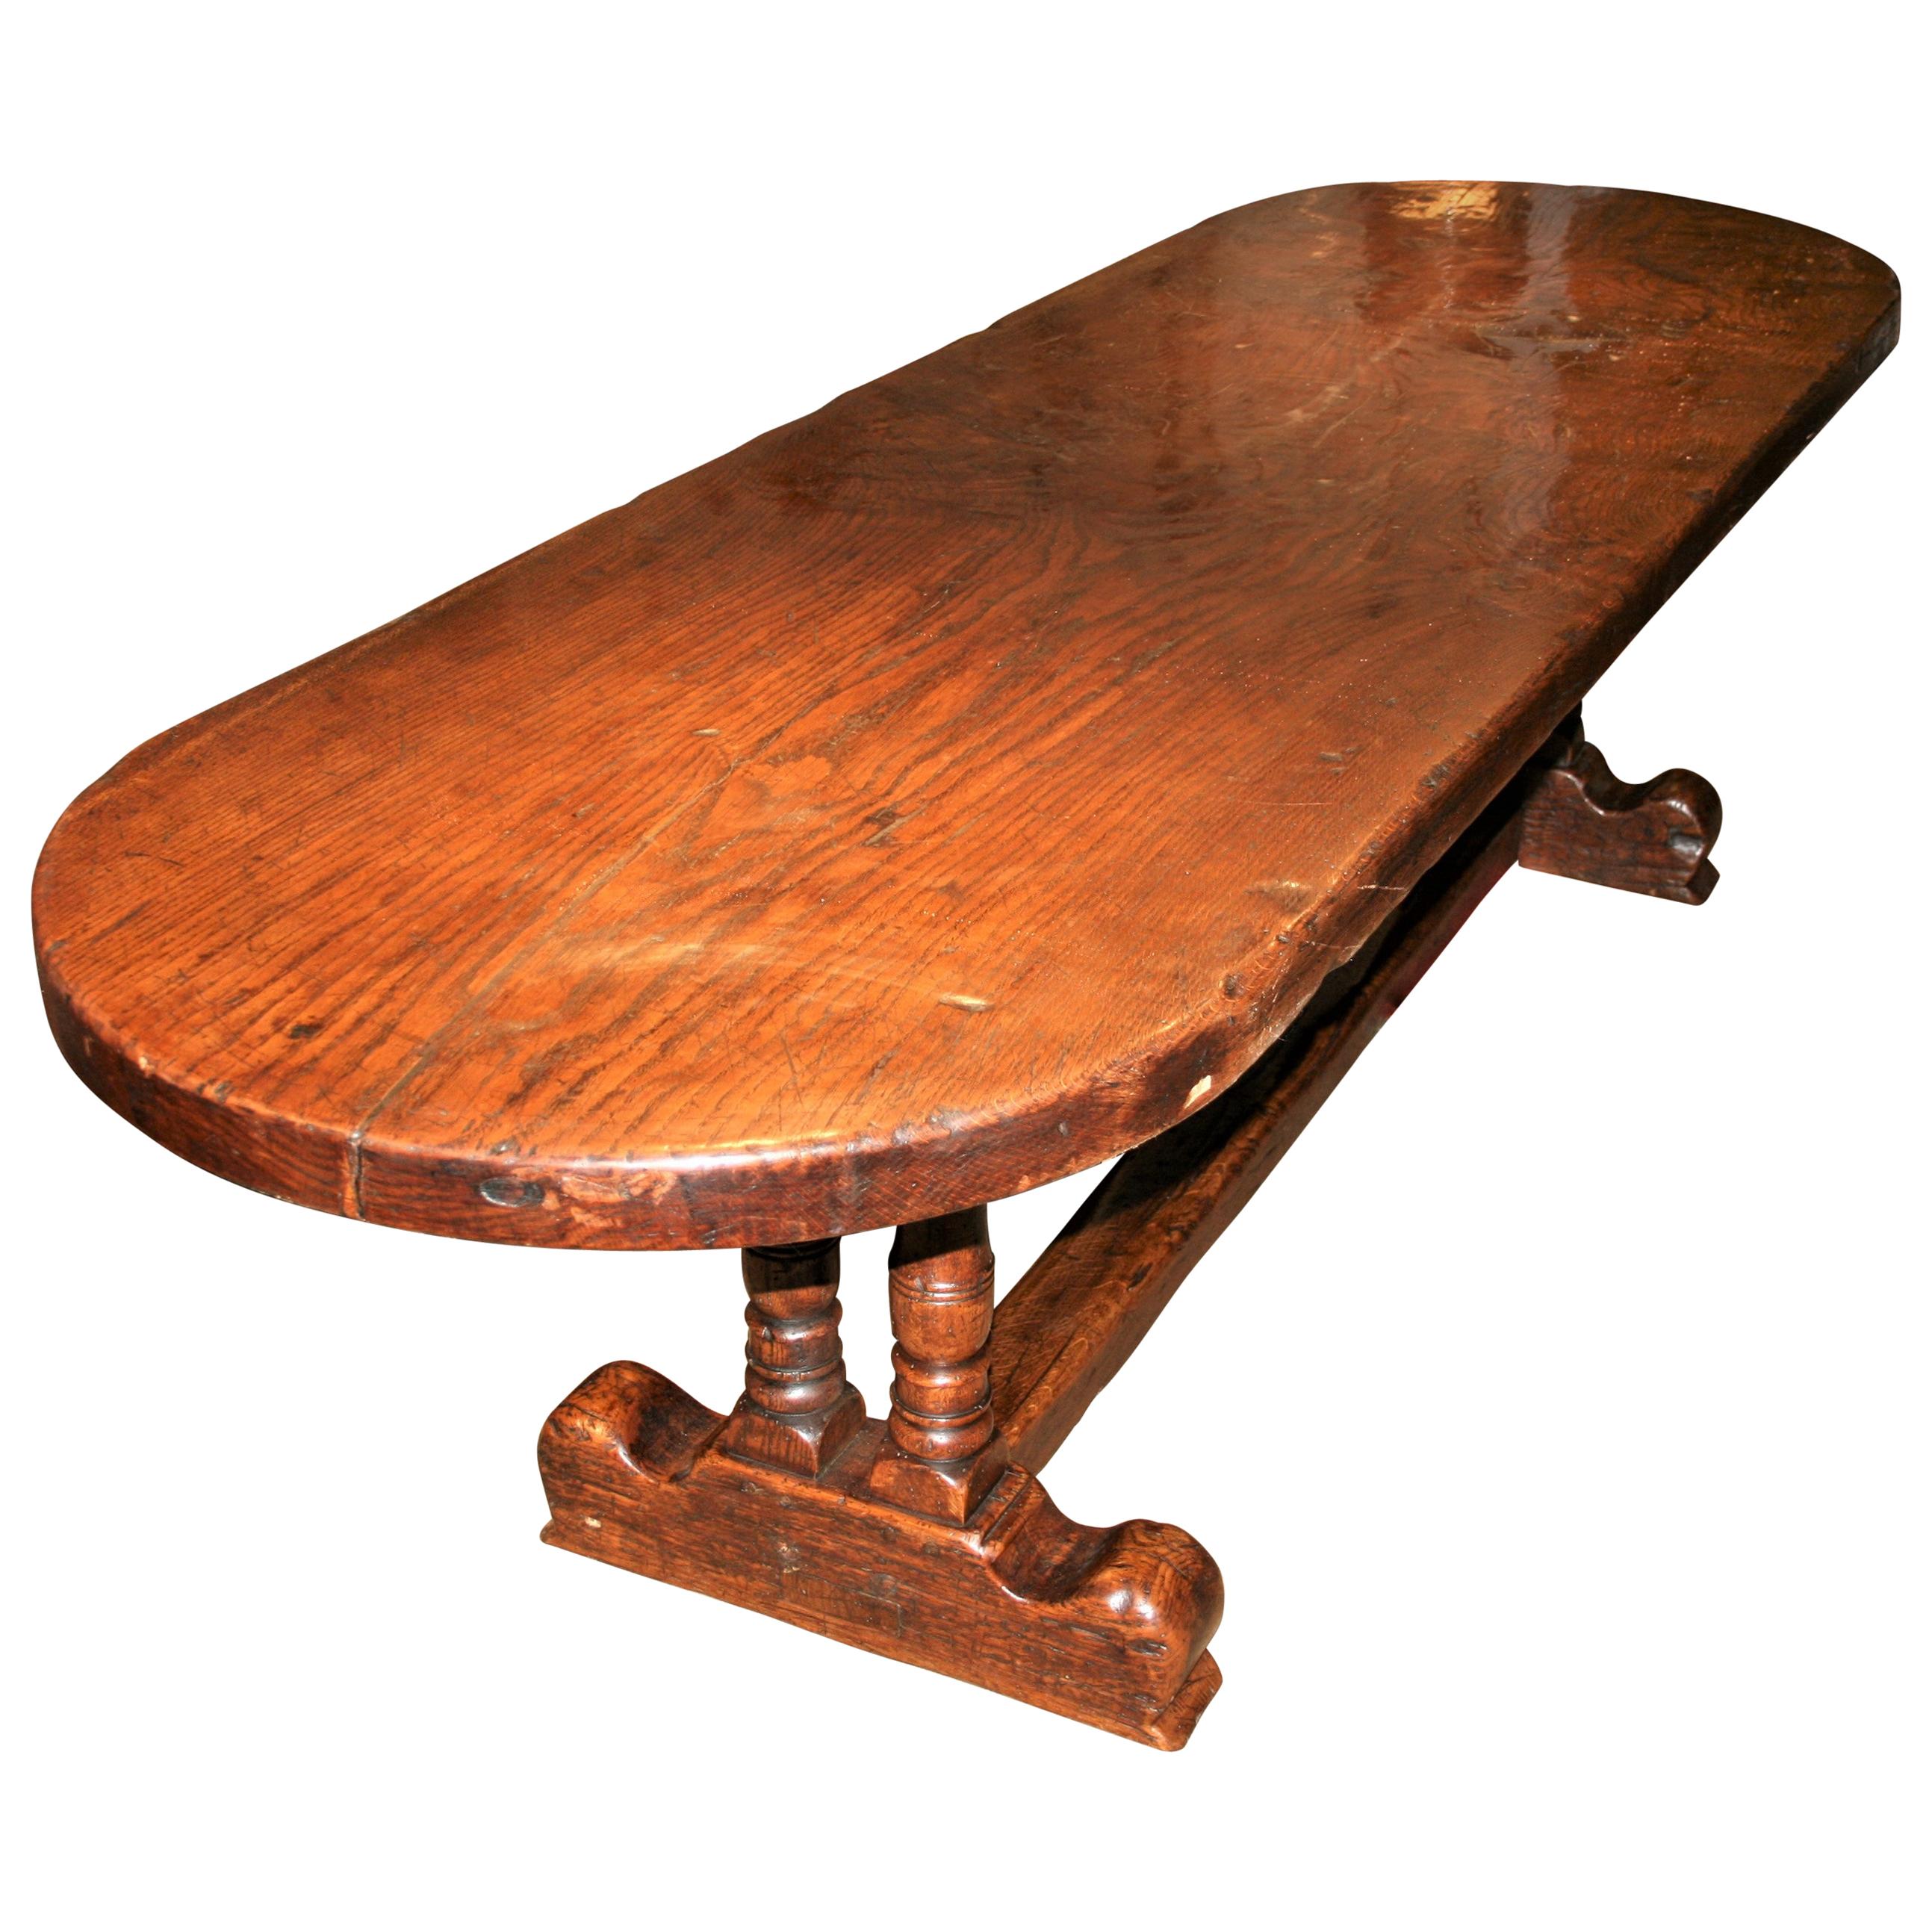 Solid Oak Refectory Table